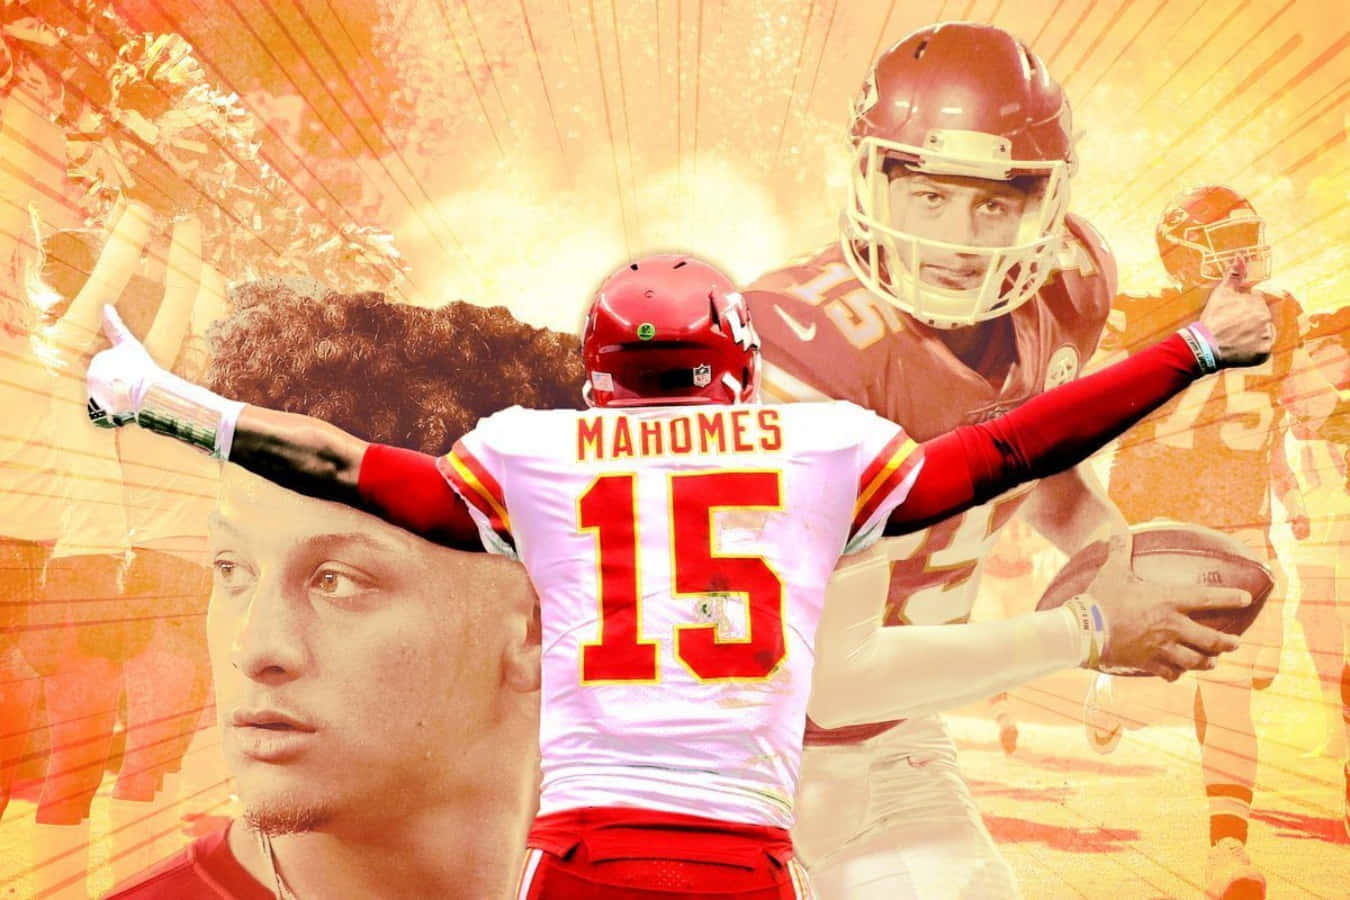 Patrick Mahomes Cool Vintage Graphic Art Background